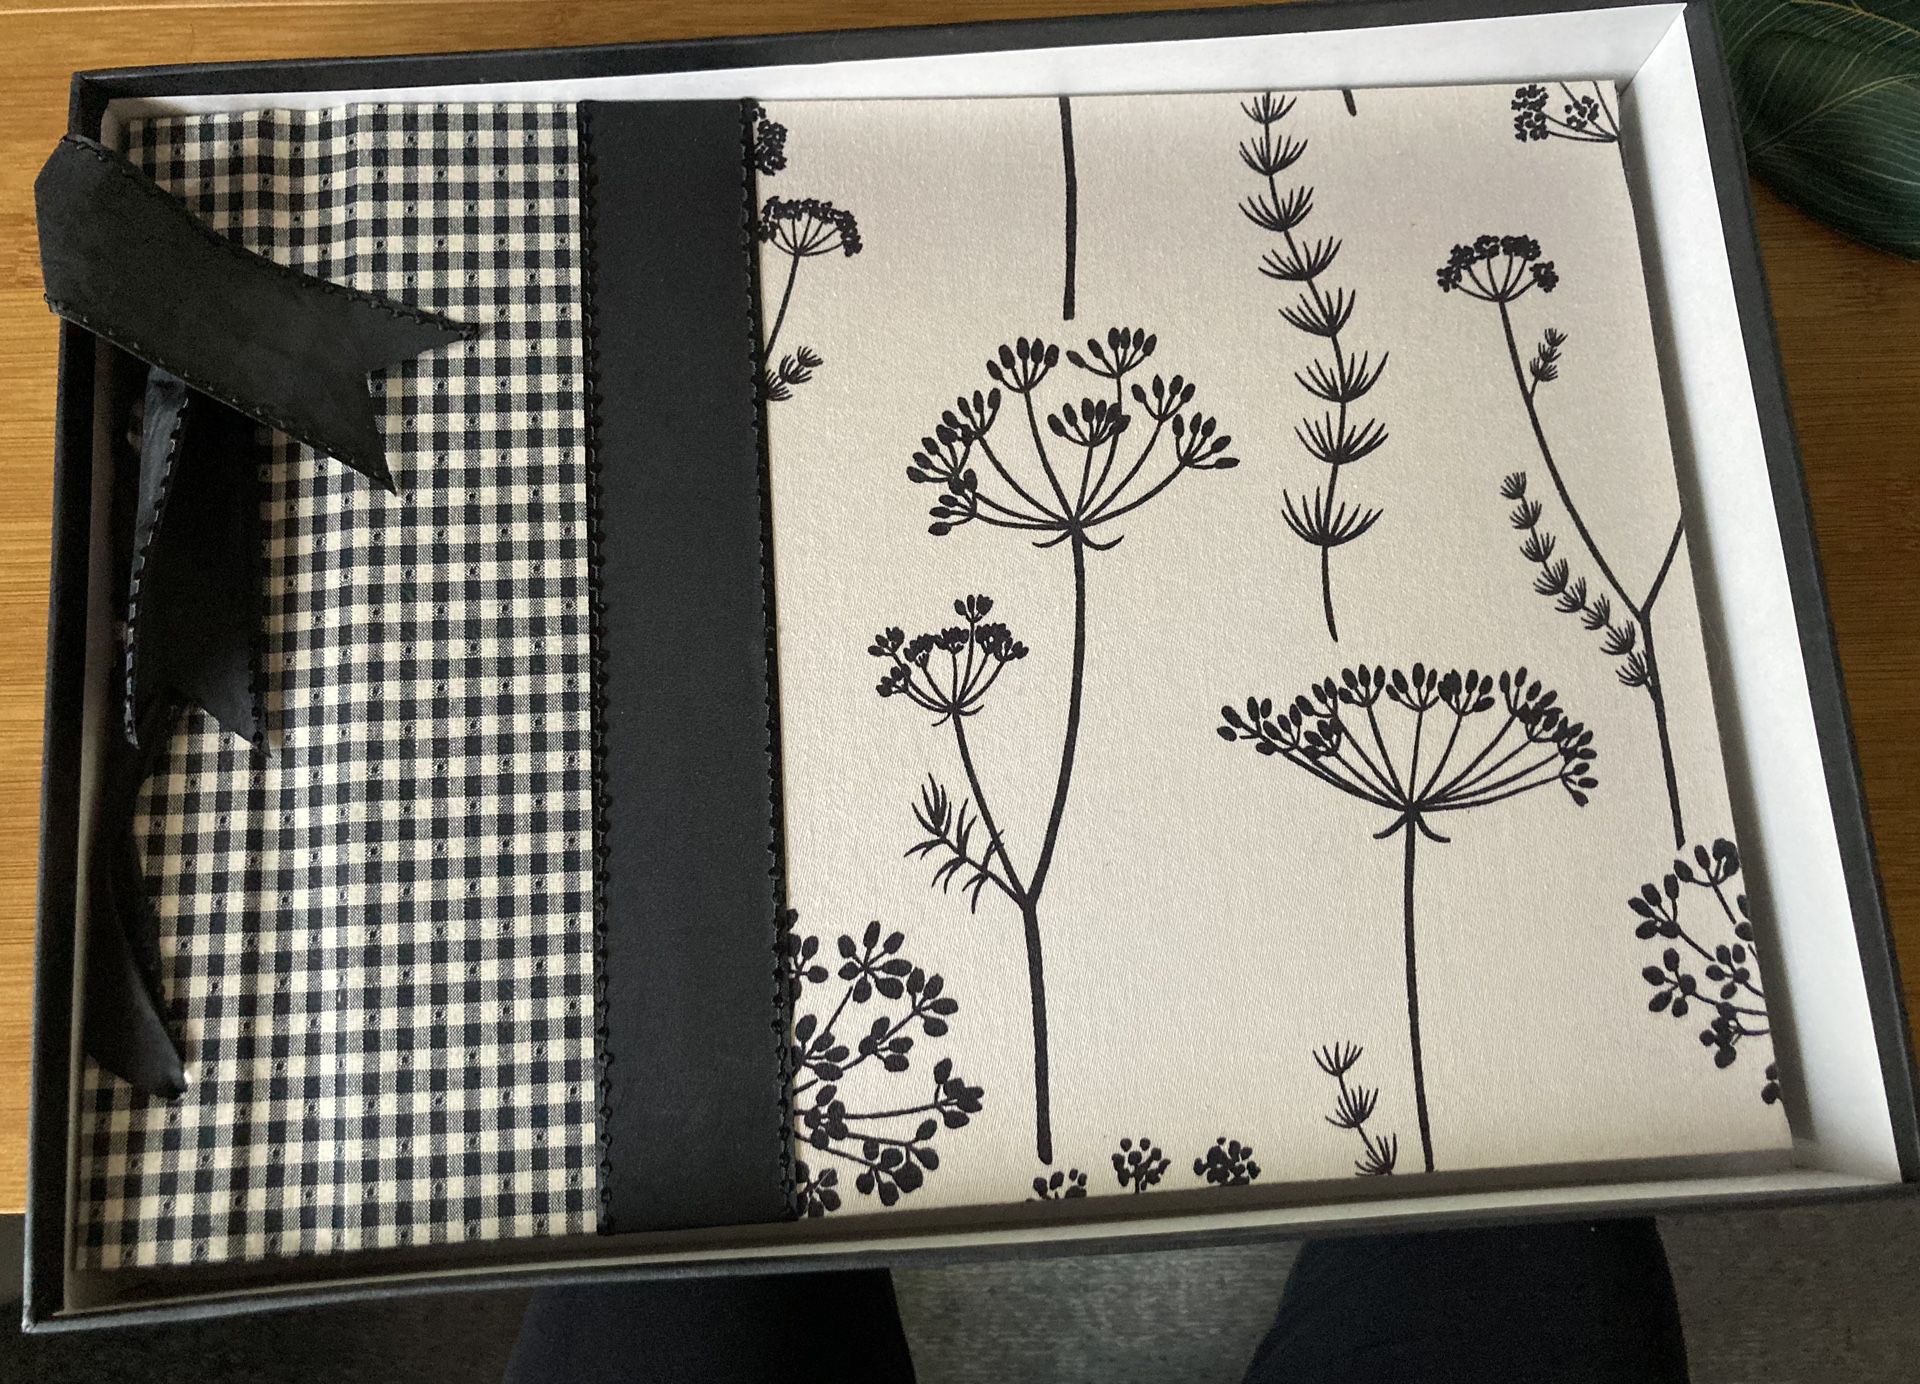 Molly West Hand bound Photo Album - Black And White Floral & Gingham